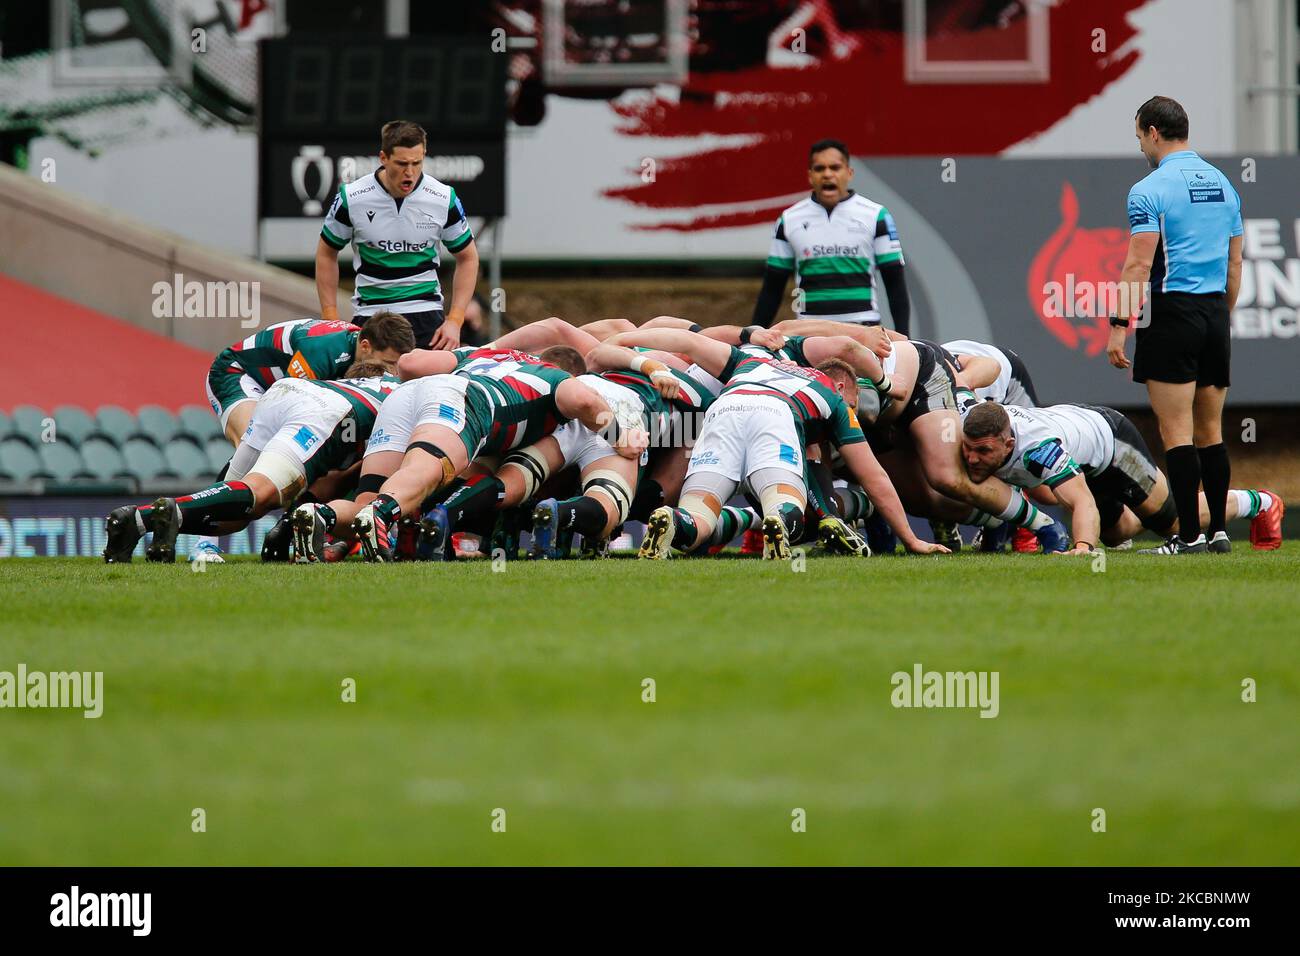 Scrum action during the Gallagher Premiership match between Leicester Tigers and Newcastle Falcons at Welford Road, Leicester, Engalnd on 28th March 2021. (Photo by Chris Lishman/MI News/NurPhoto) Stock Photo